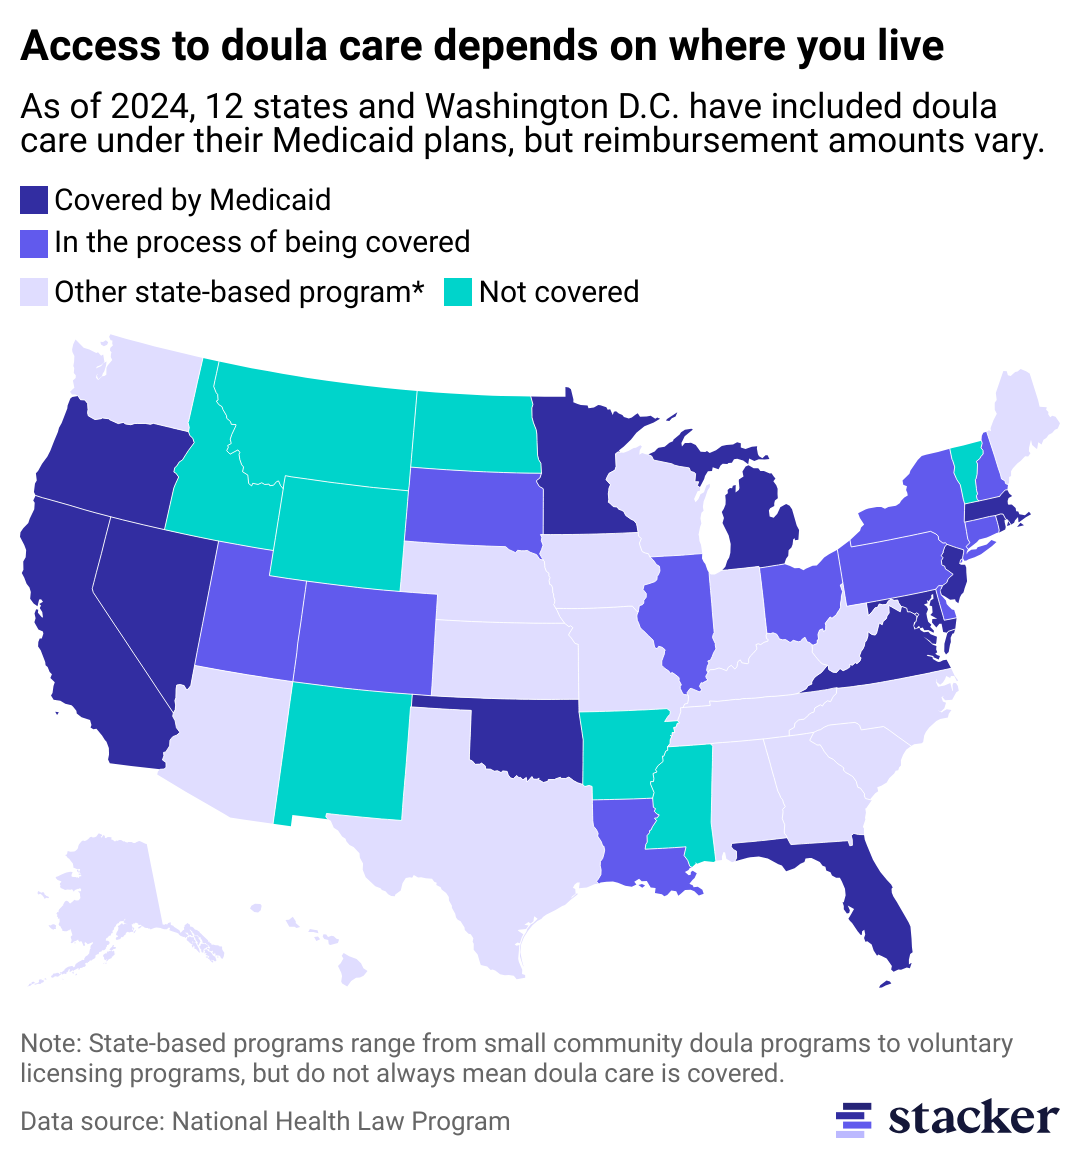 A map showing where doula care is covered by Medicaid by state.